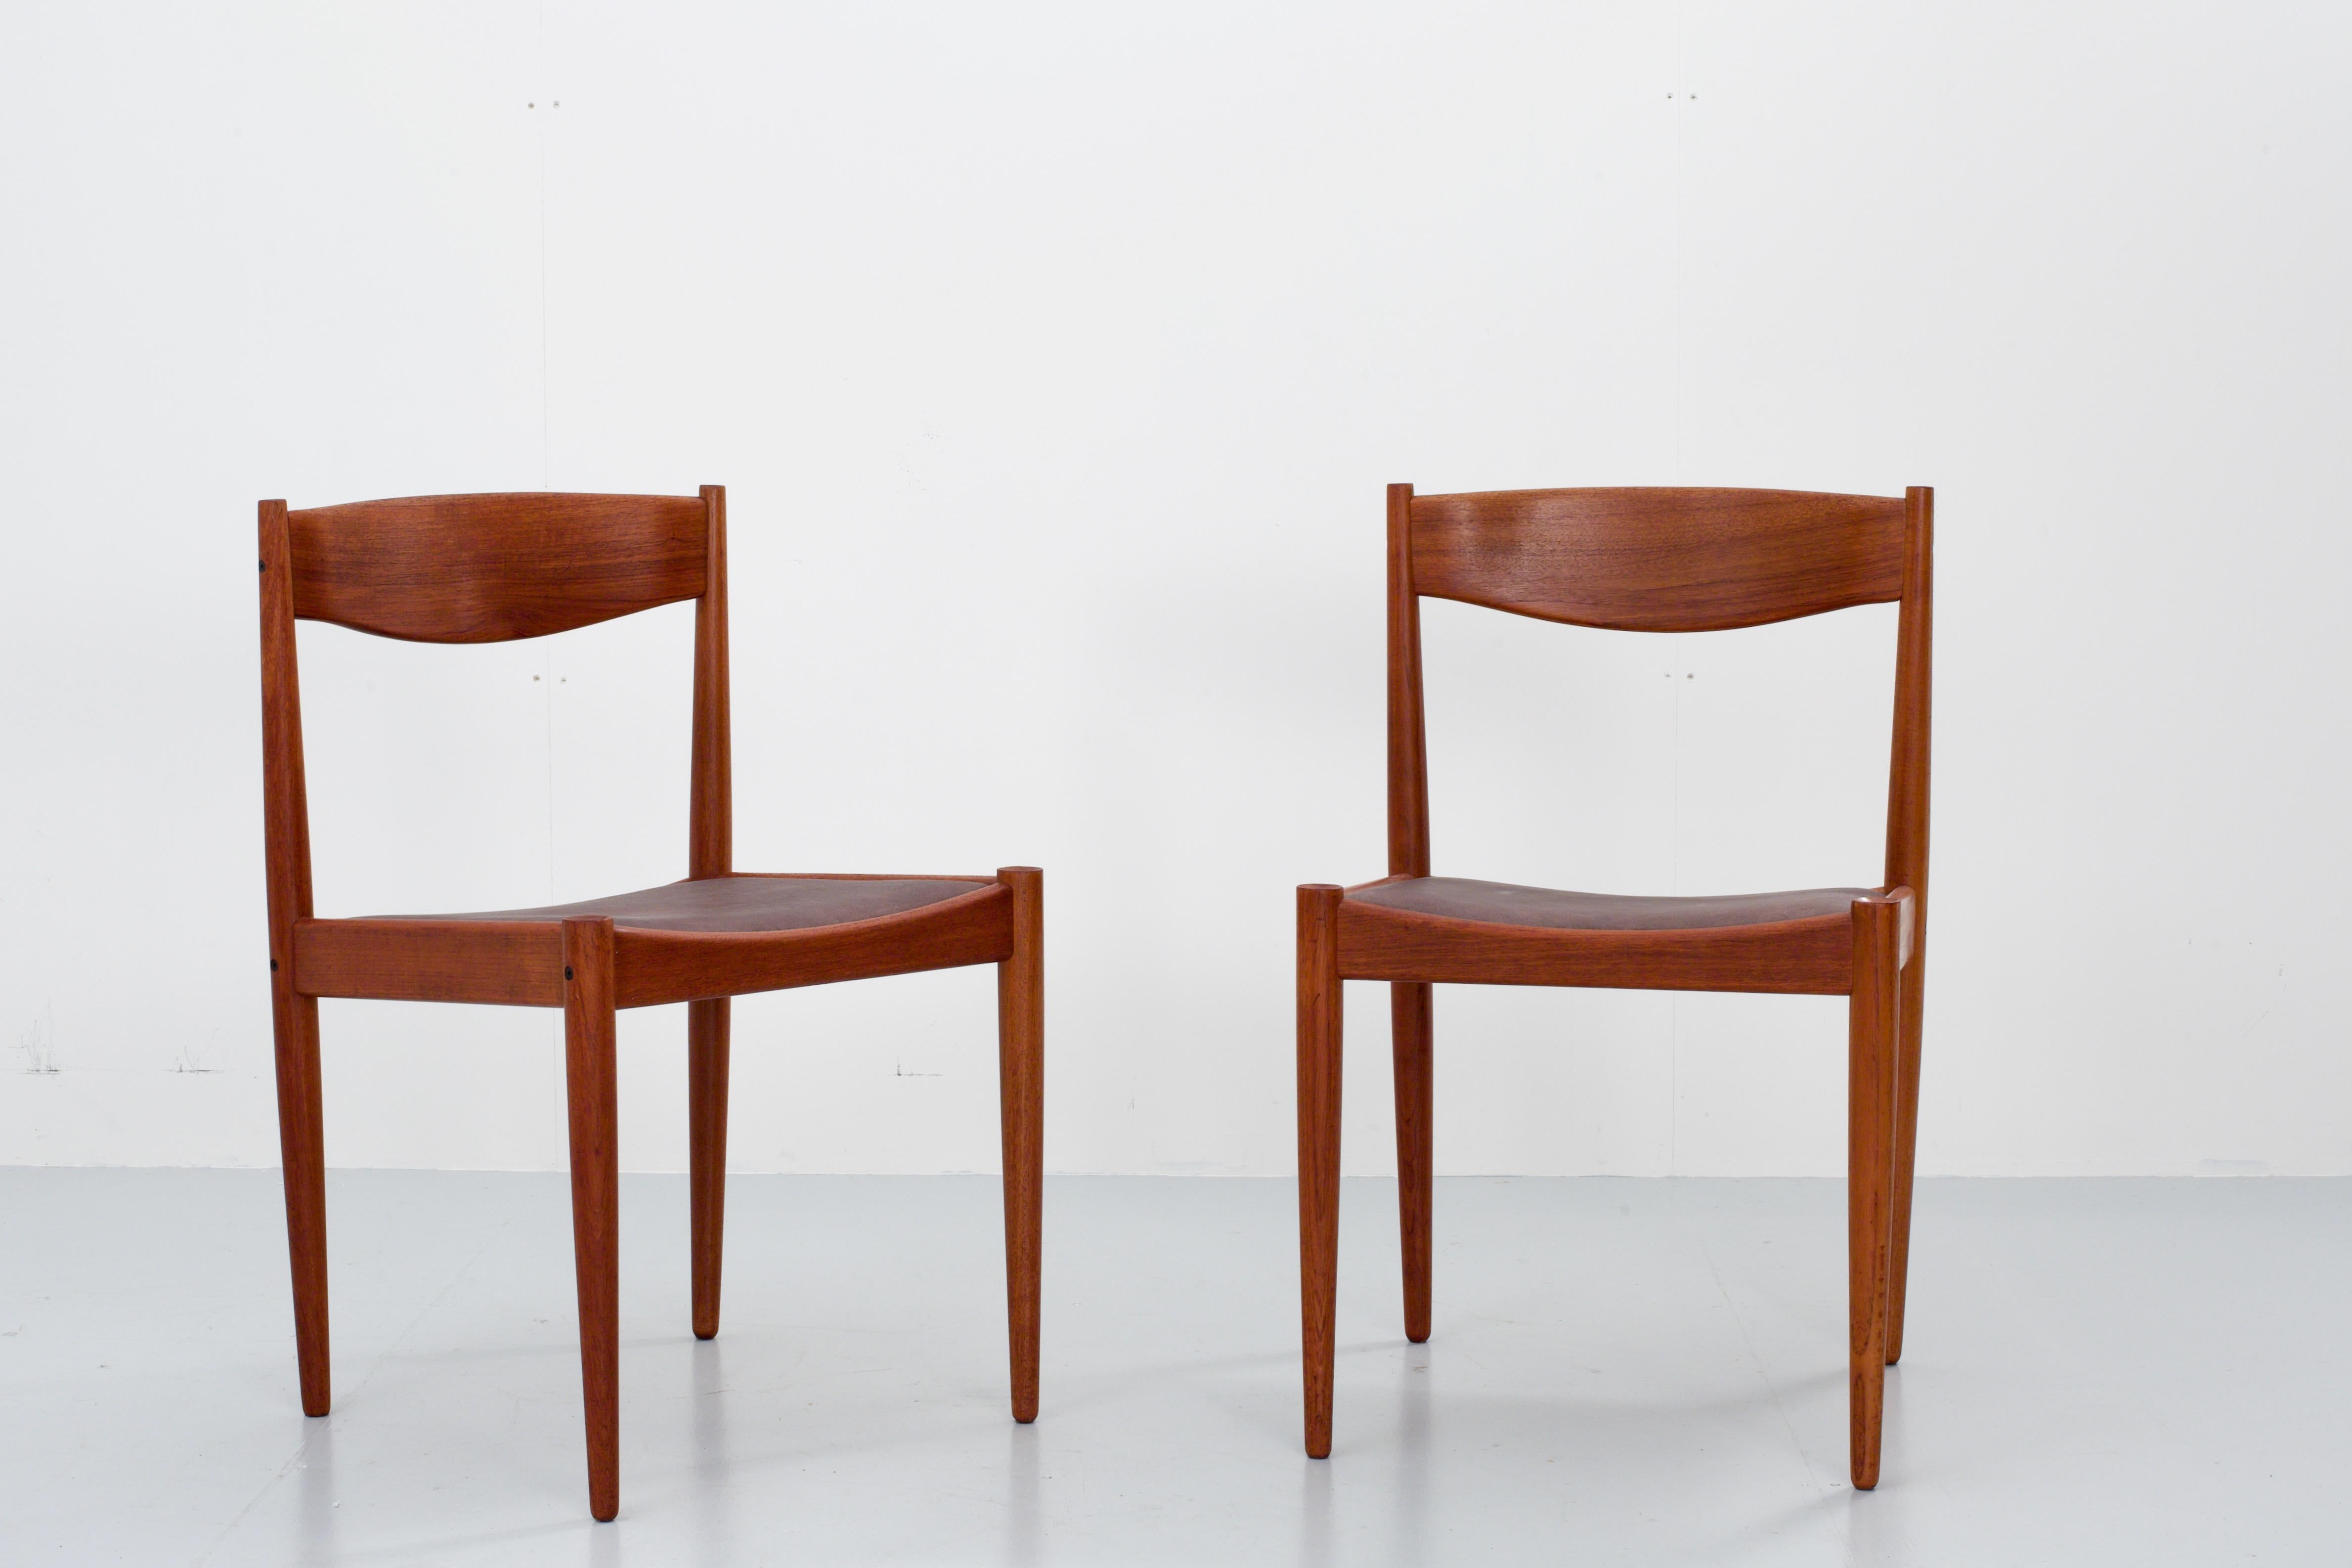 Mid-20th Century Set of 4 Dining Chairs in Teak by H.W. Klein for Bramin Mobler, Denmark, 1960